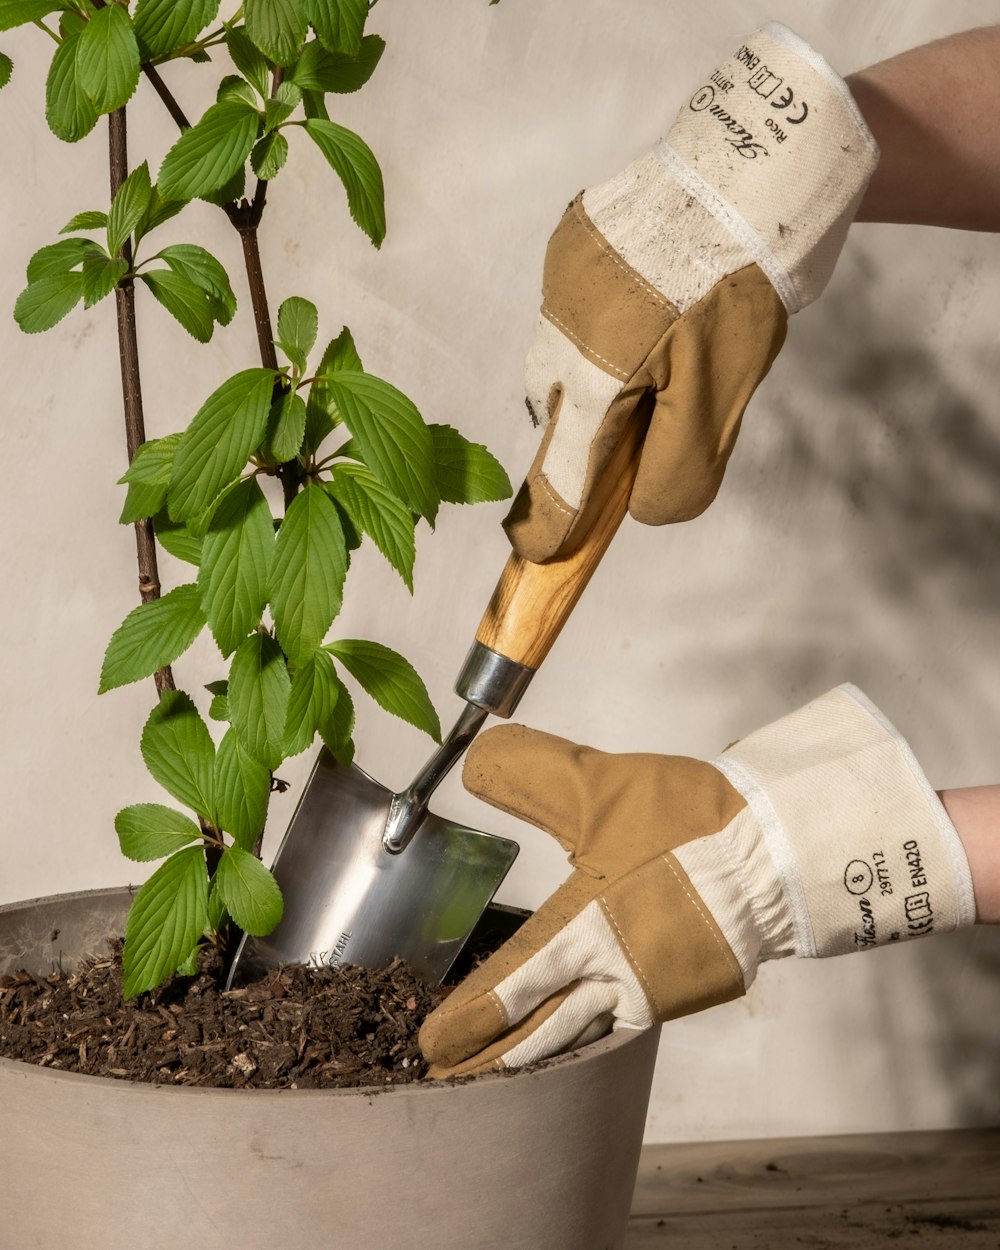 a person with gloves and gardening gloves is digging into a potted plant